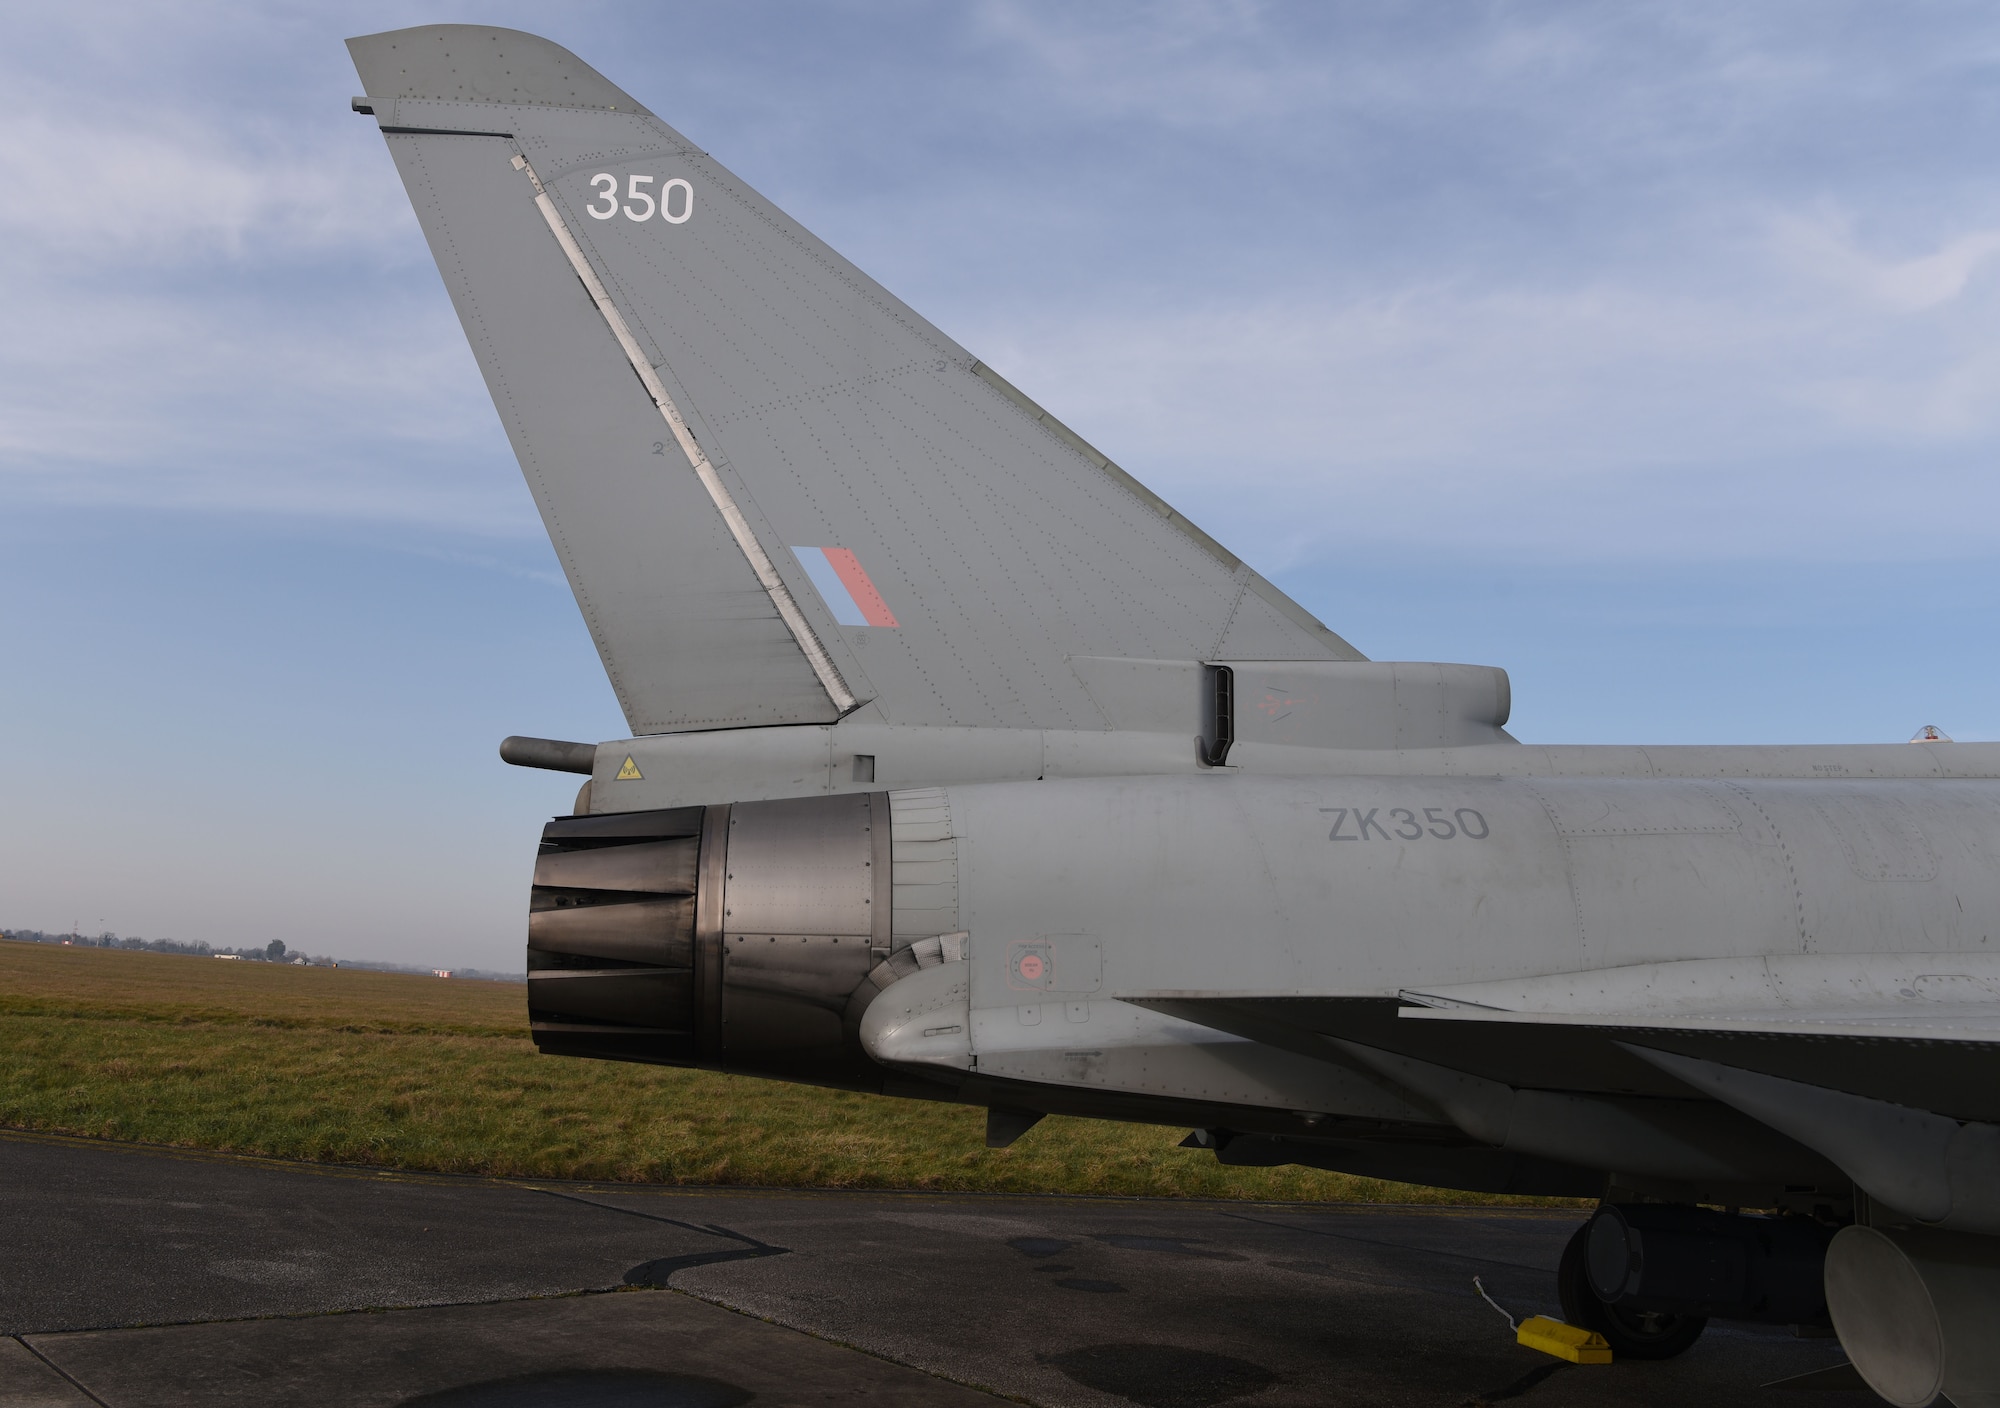 A Royal Air Force Eurofighter Typhoon FGR4 sits on the taxiway at Royal Air Force Mildenhall, England, Feb. 15, 2023. The aircraft, from RAF Coningsby, England, diverted here due to bad weather. The Typhoon is a highly capable and extremely agile multi-role combat aircraft, capable of being deployed for the full spectrum of air operations, including air policing, peace support and high-intensity conflict. (U.S. Air Force photo by Karen Abeyasekere)